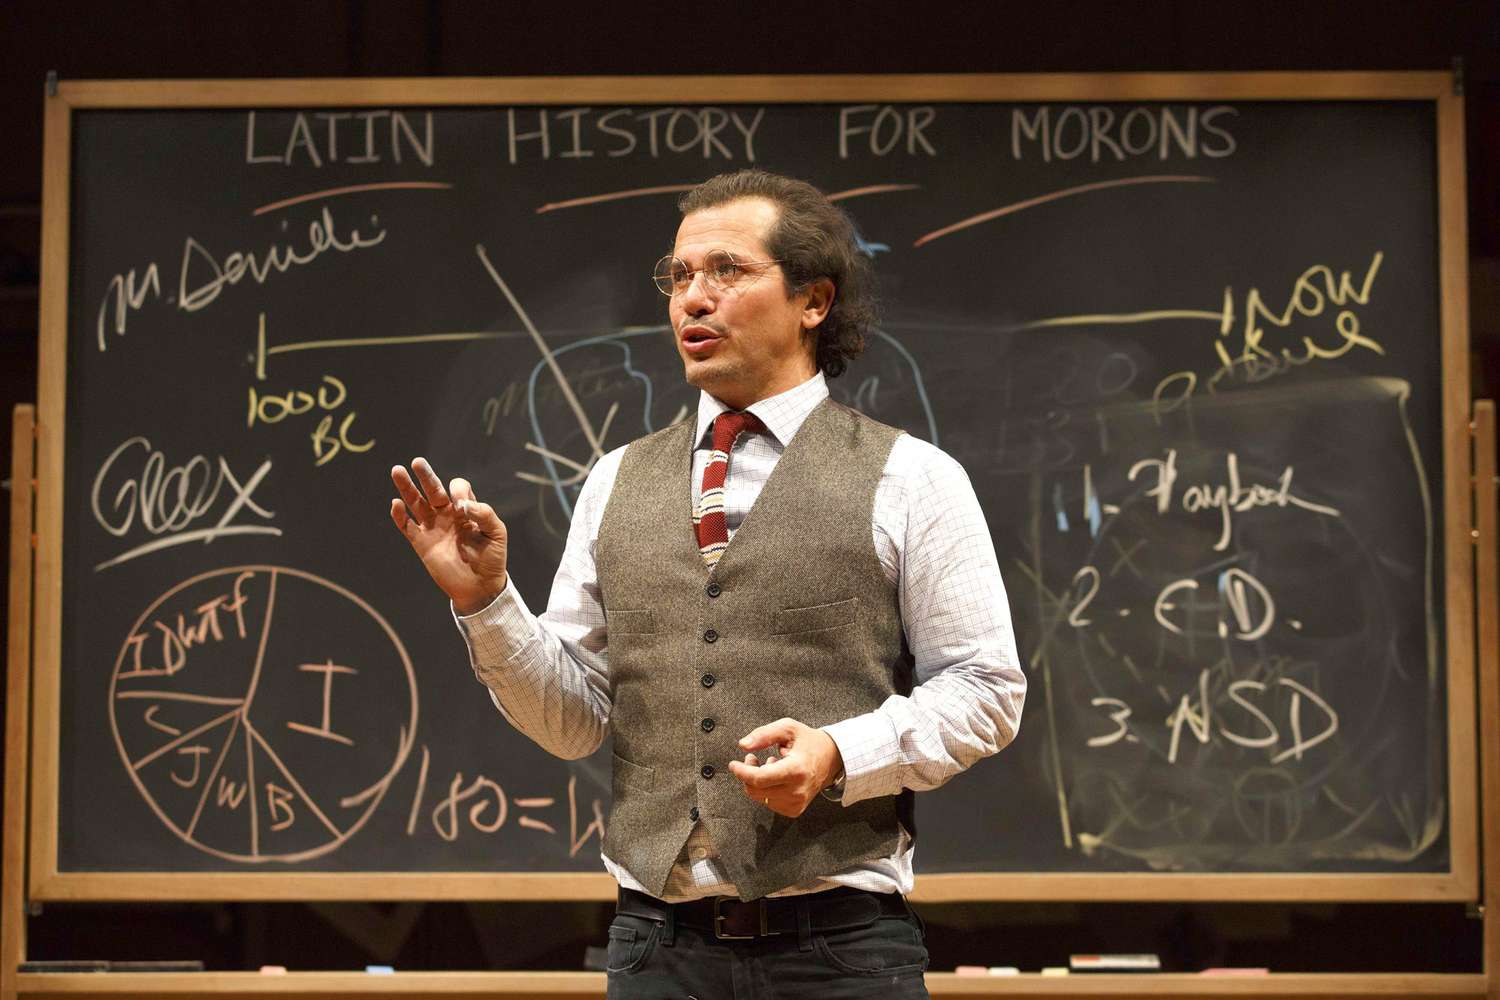 SURPRISE:&nbsp;Latin History for Morons